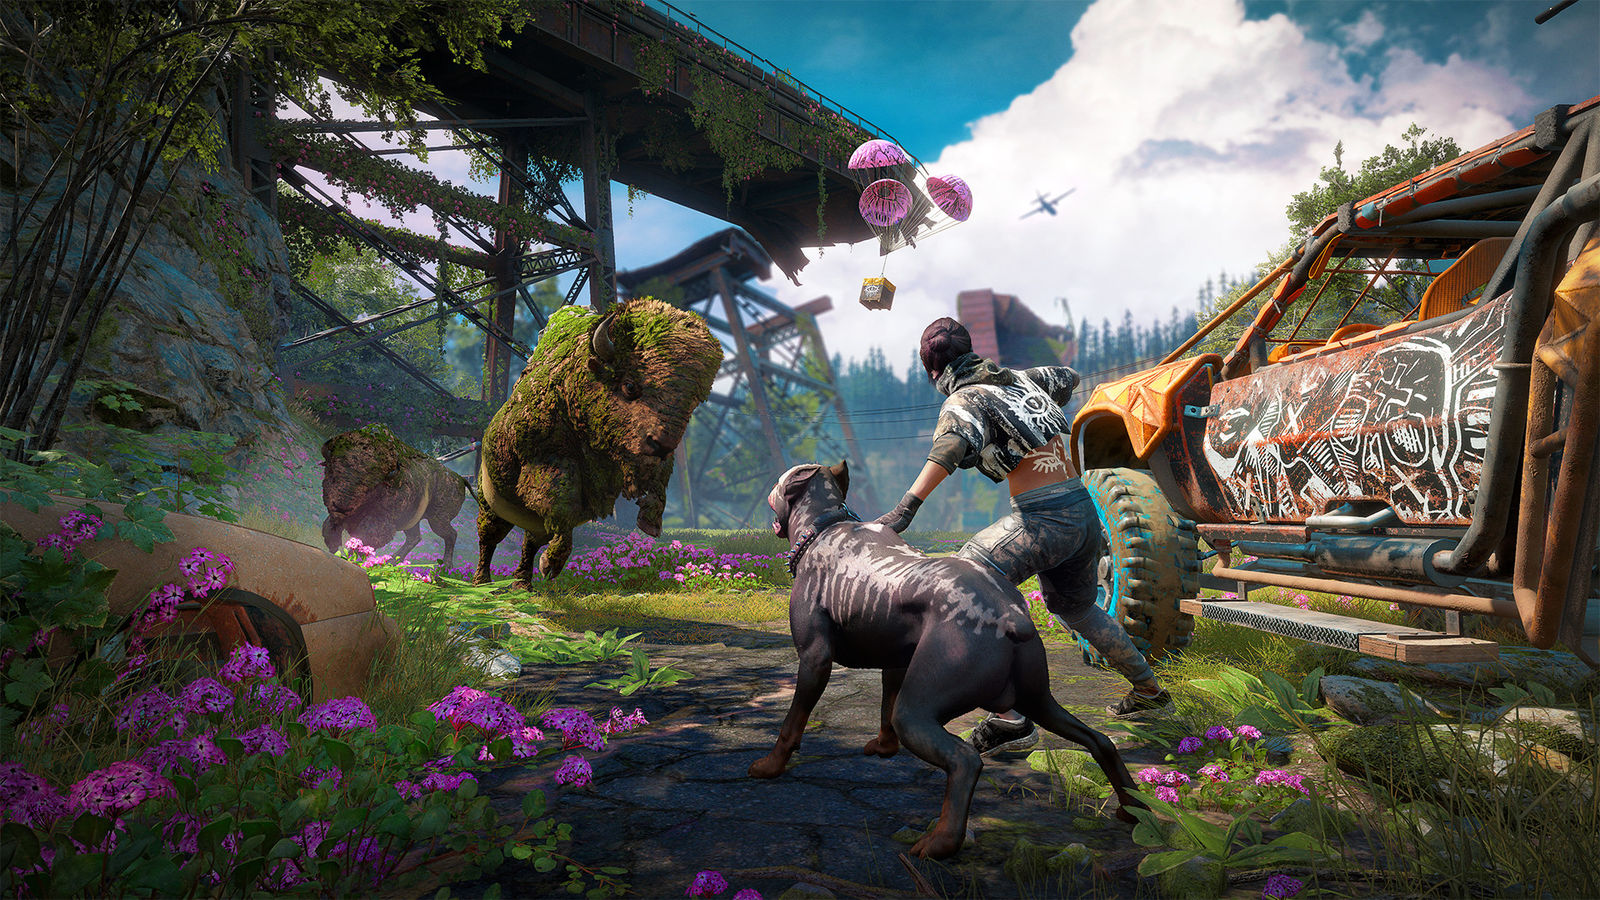 z Far Cry New Dawn Deluxe Edition (Uplay) RU/CIS